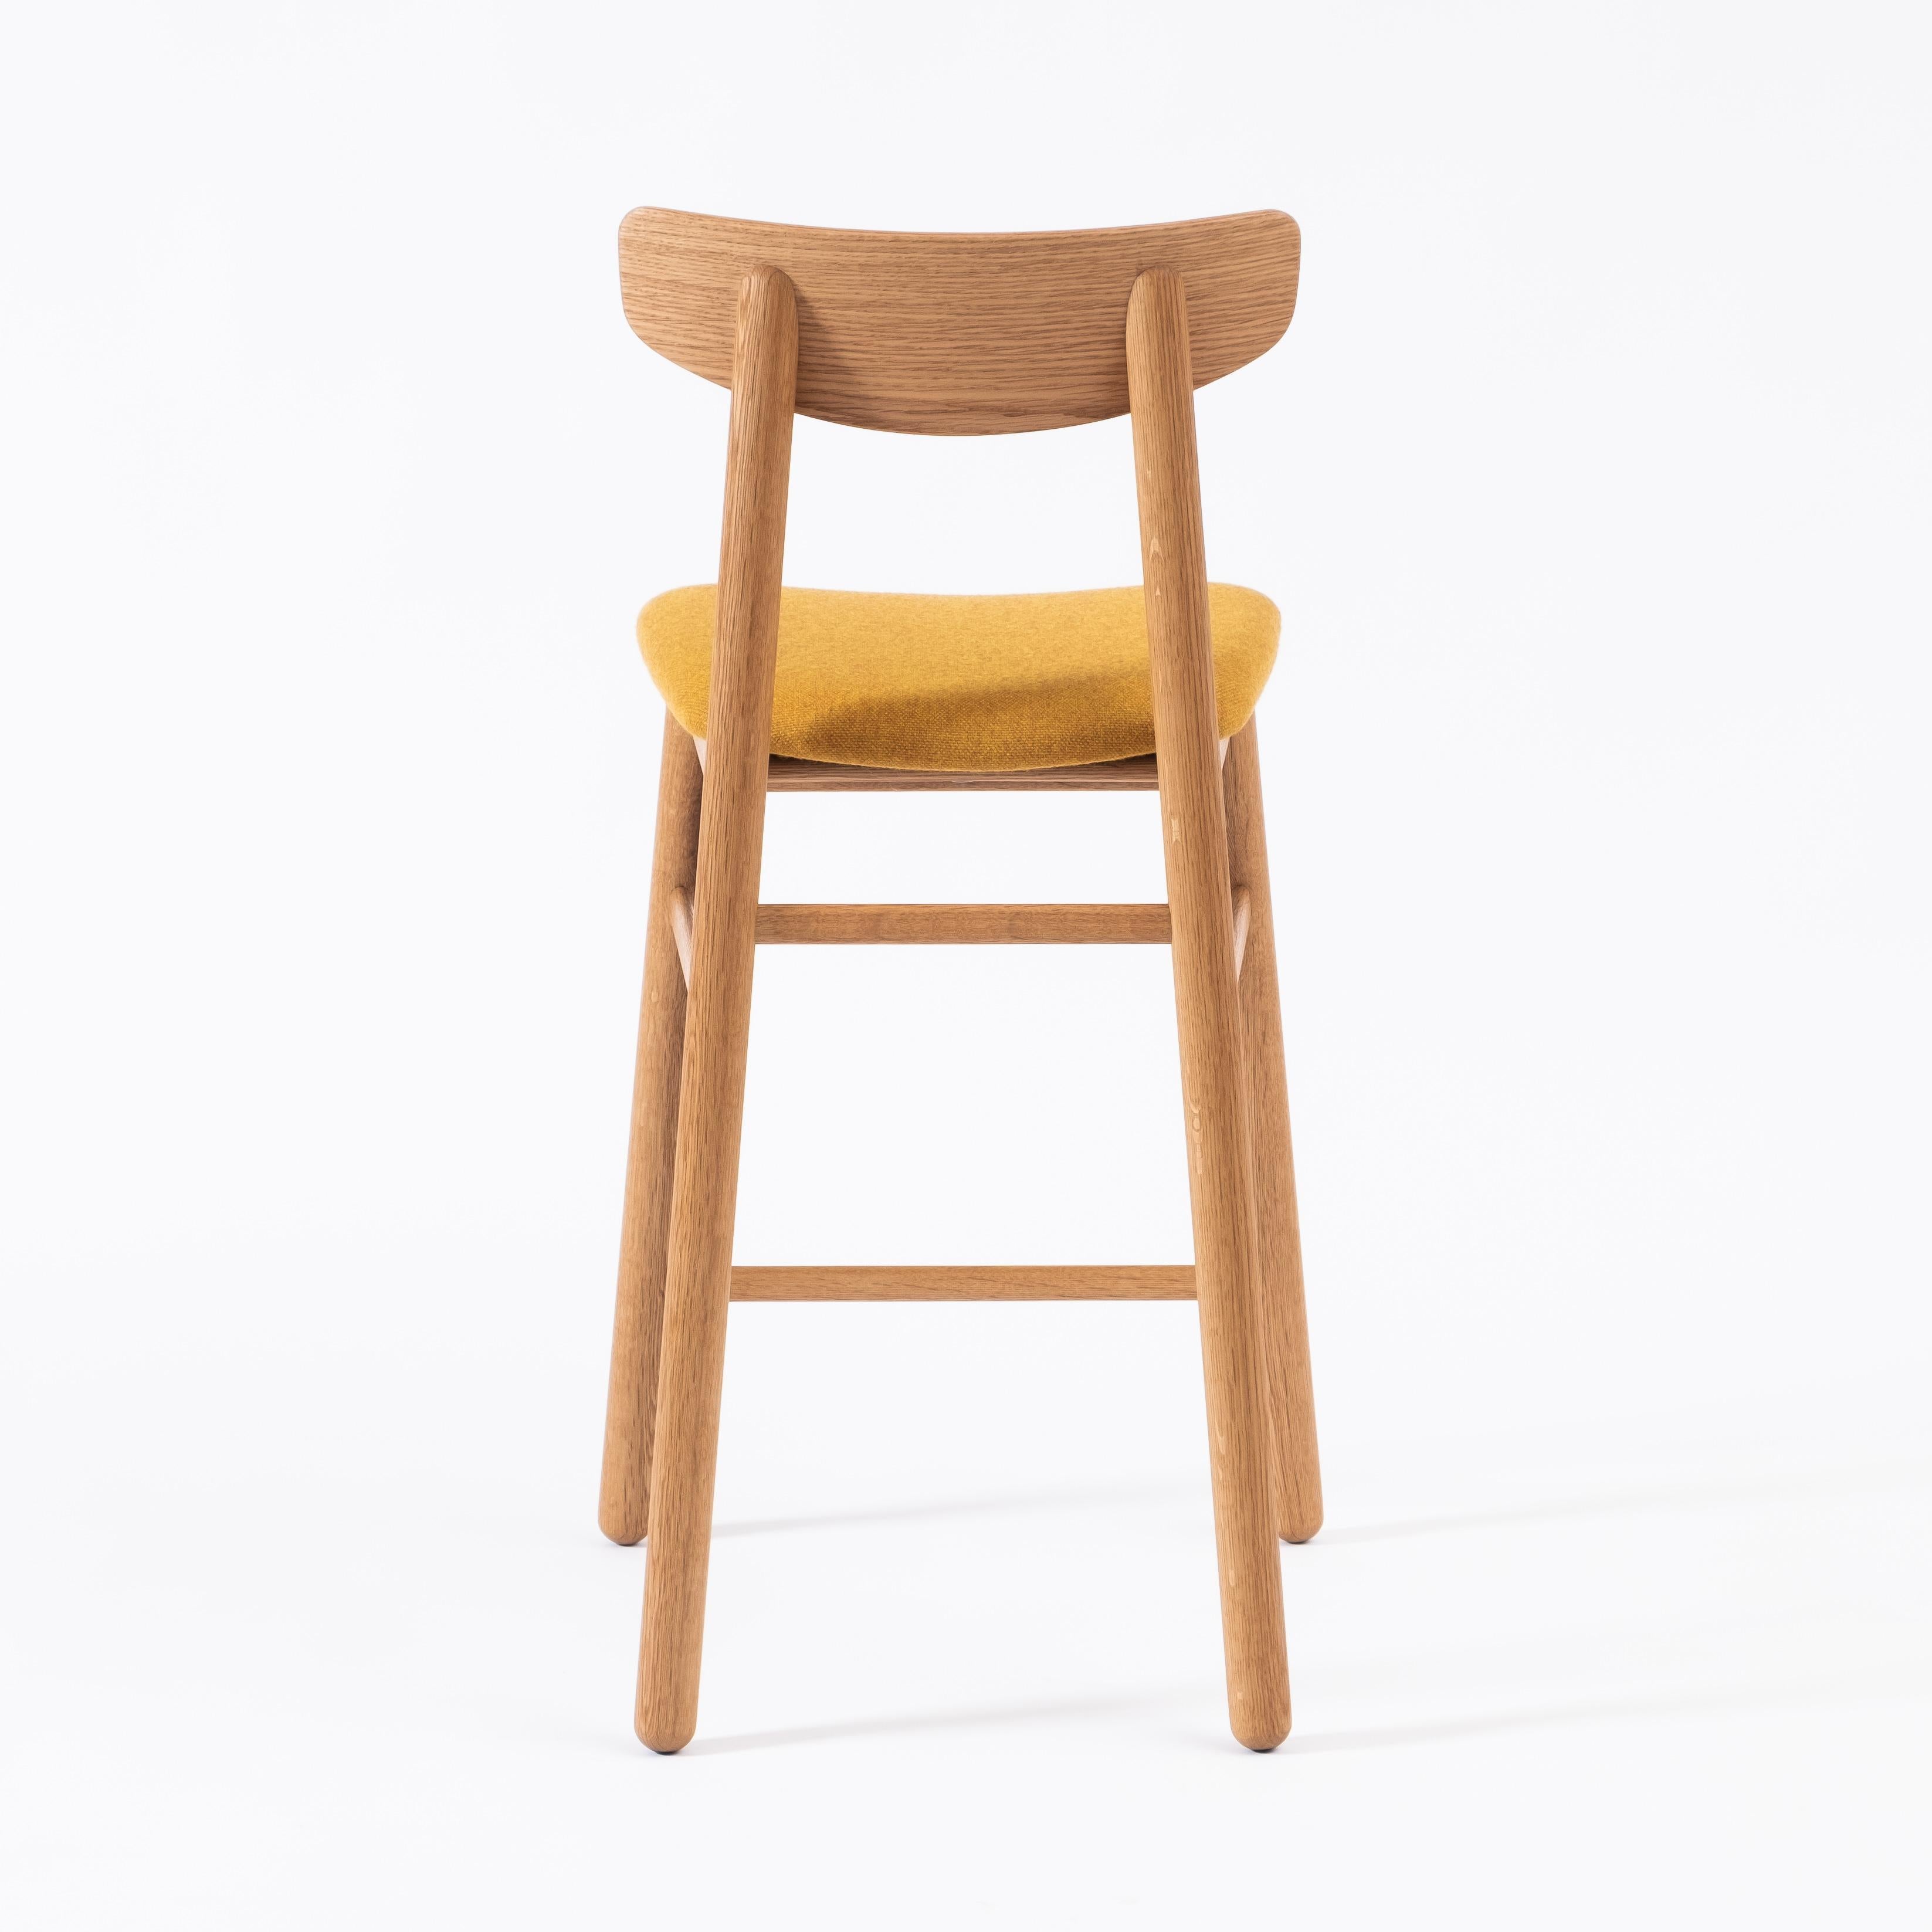 The Baton stool is a refined counter-height stool that blends a clean Mid-Century inspired aesthetic with traditional materials and joinery techniques. Each piece is handcrafted to order in our Ottawa studio.

The Baton is built using mortise and